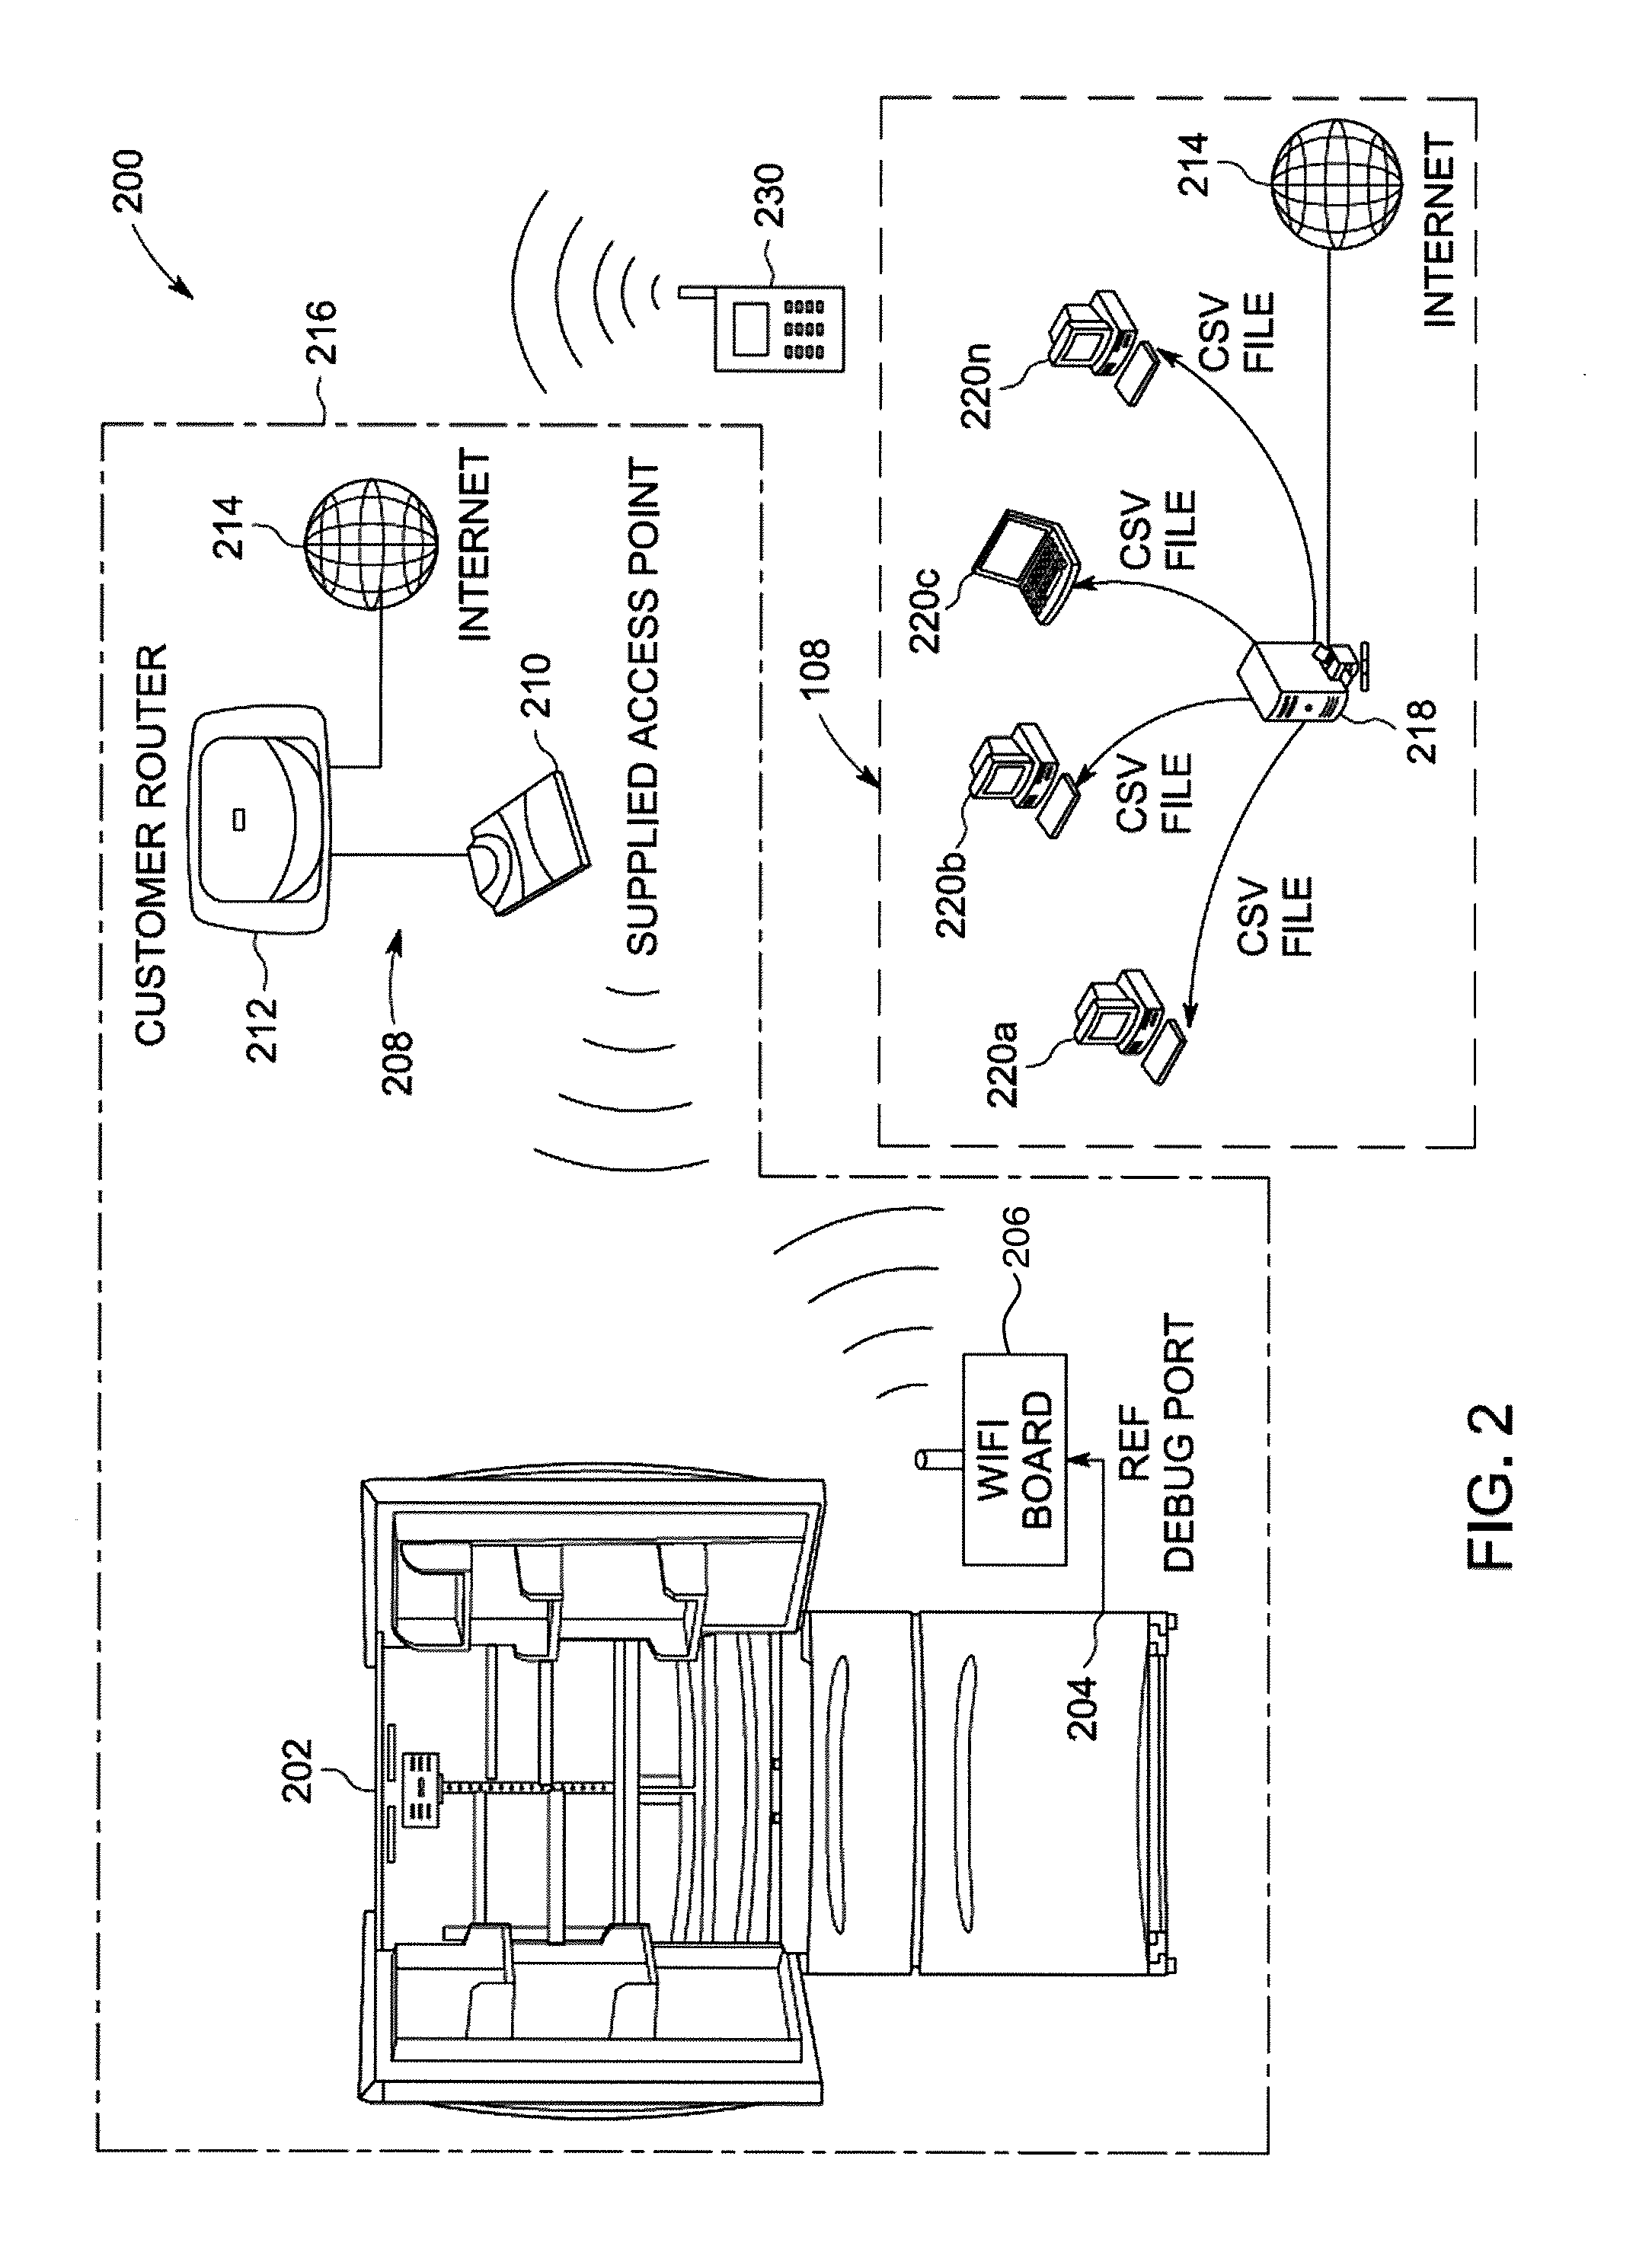 Appliance monitoring system and method